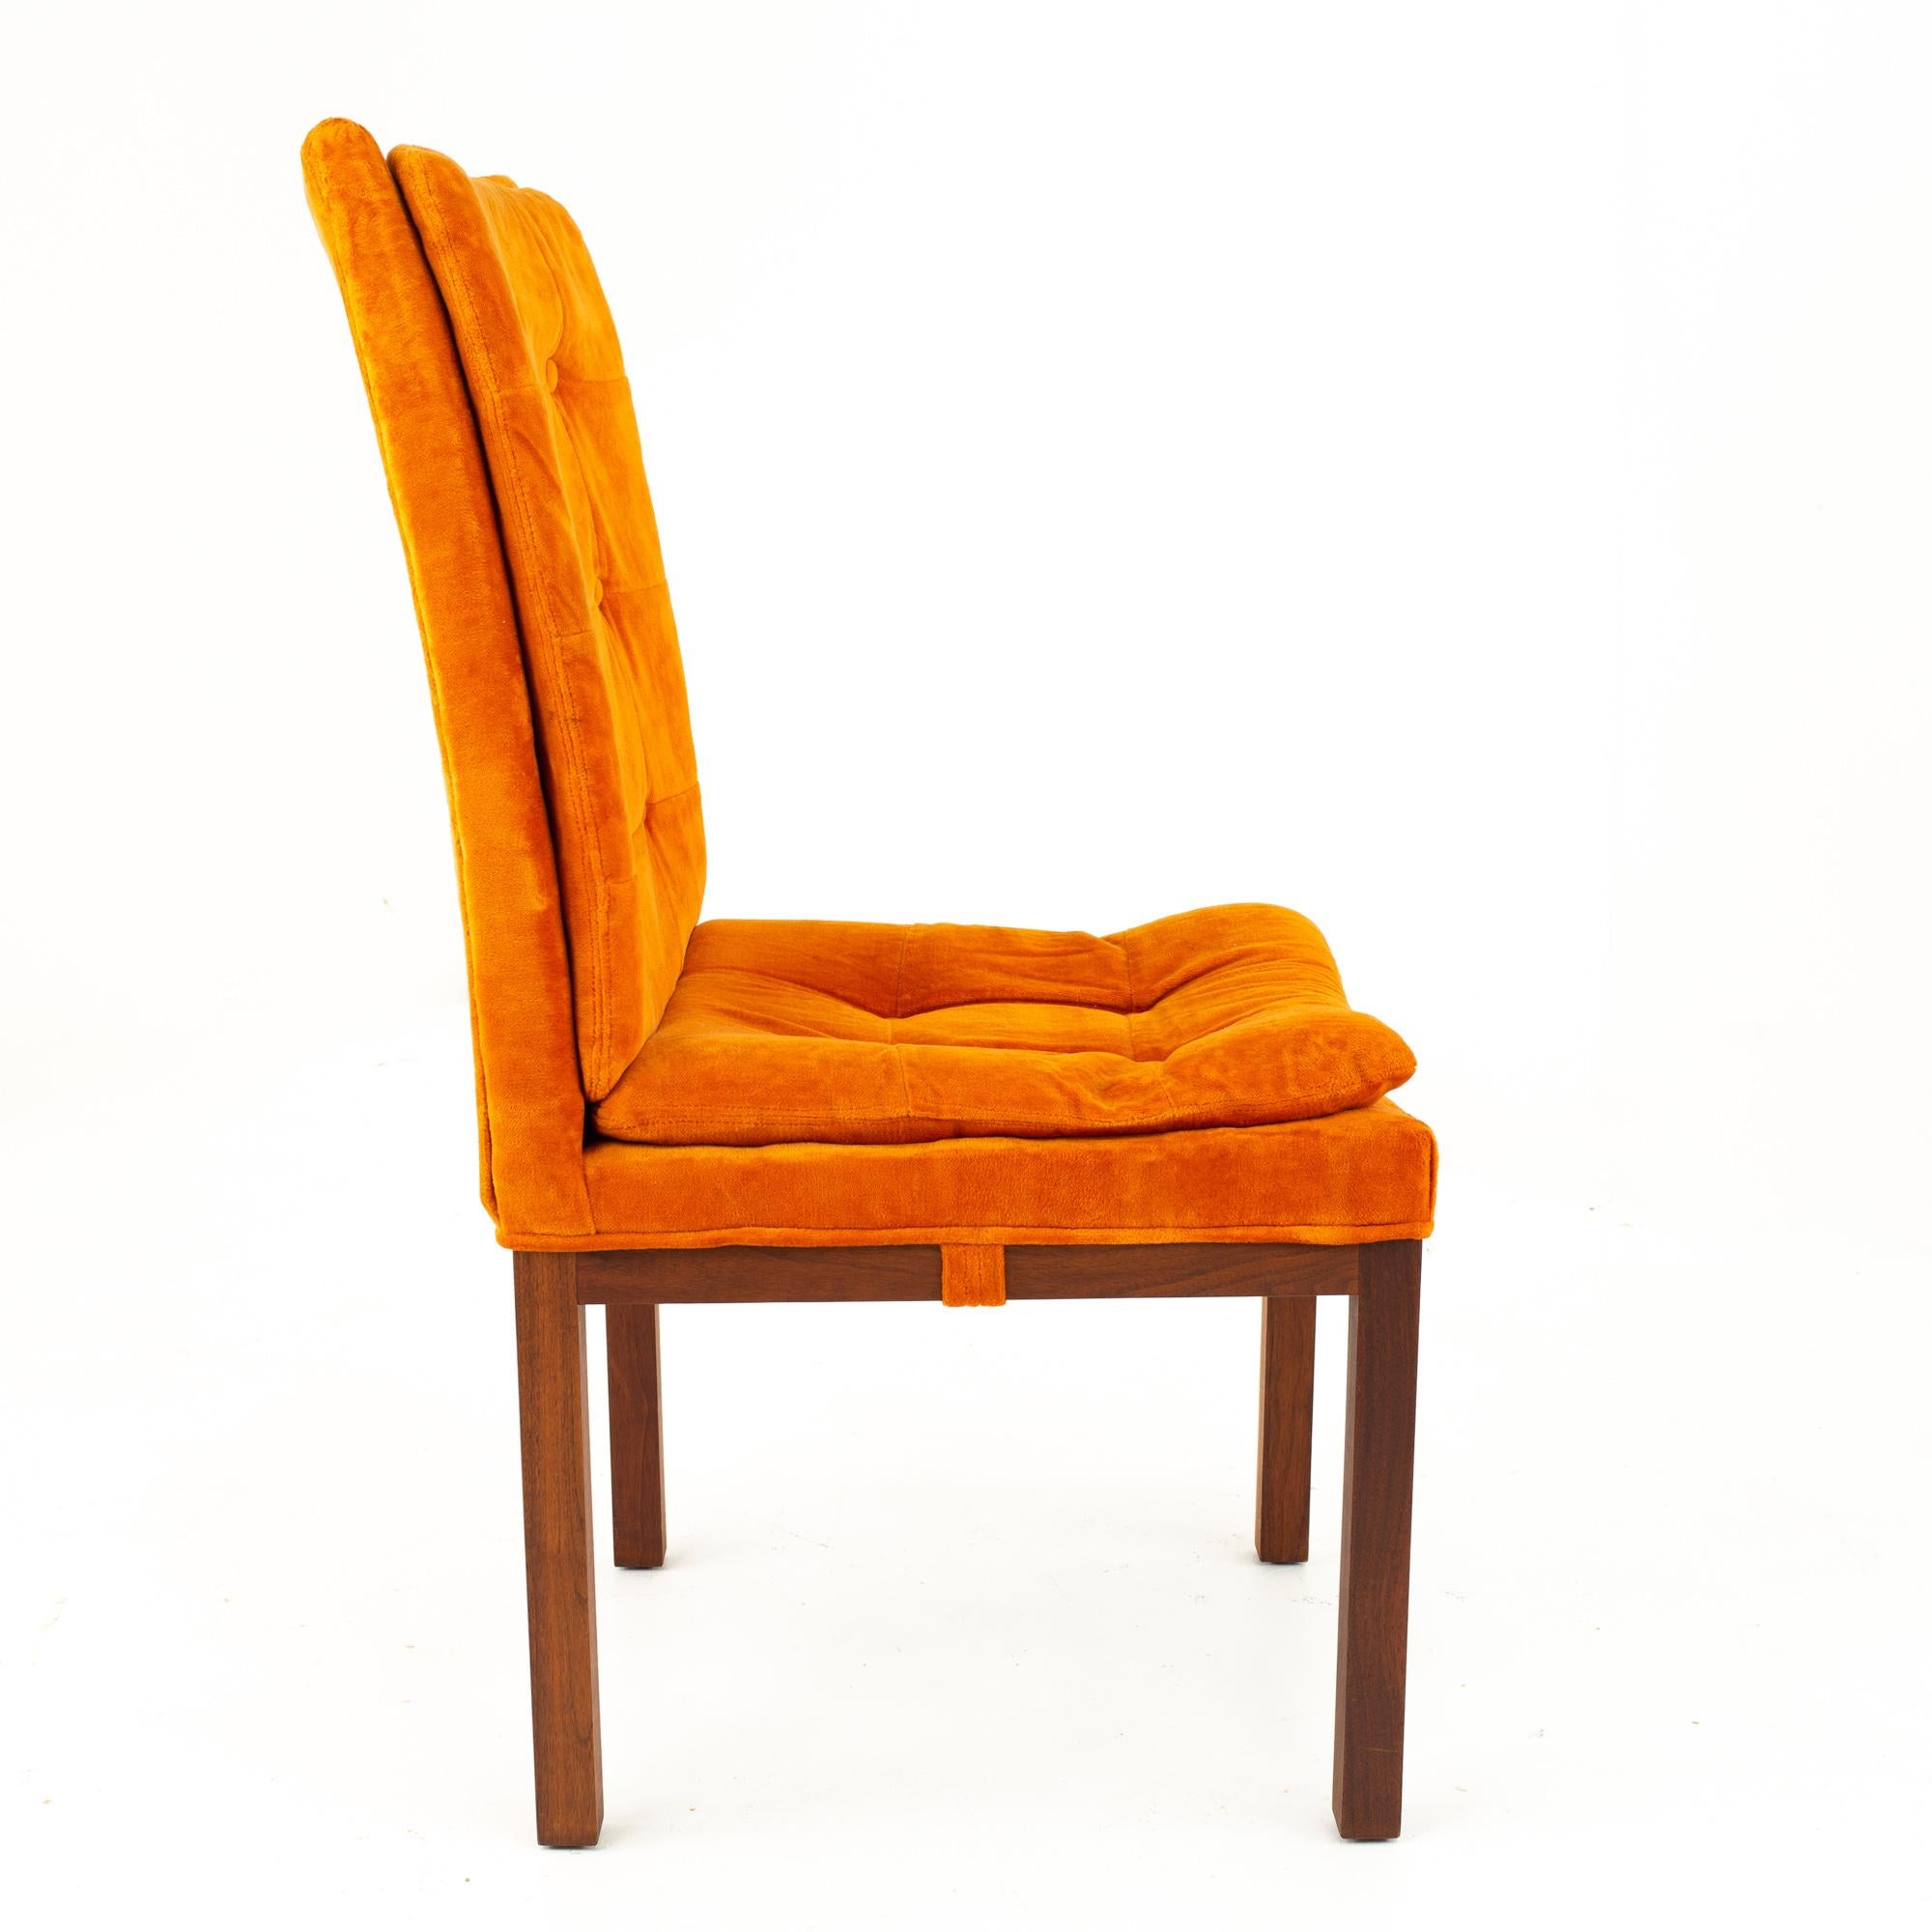 Milo Baughman Style Dillingham Orange and Walnut Upholstered Dining Chairs - Set 6